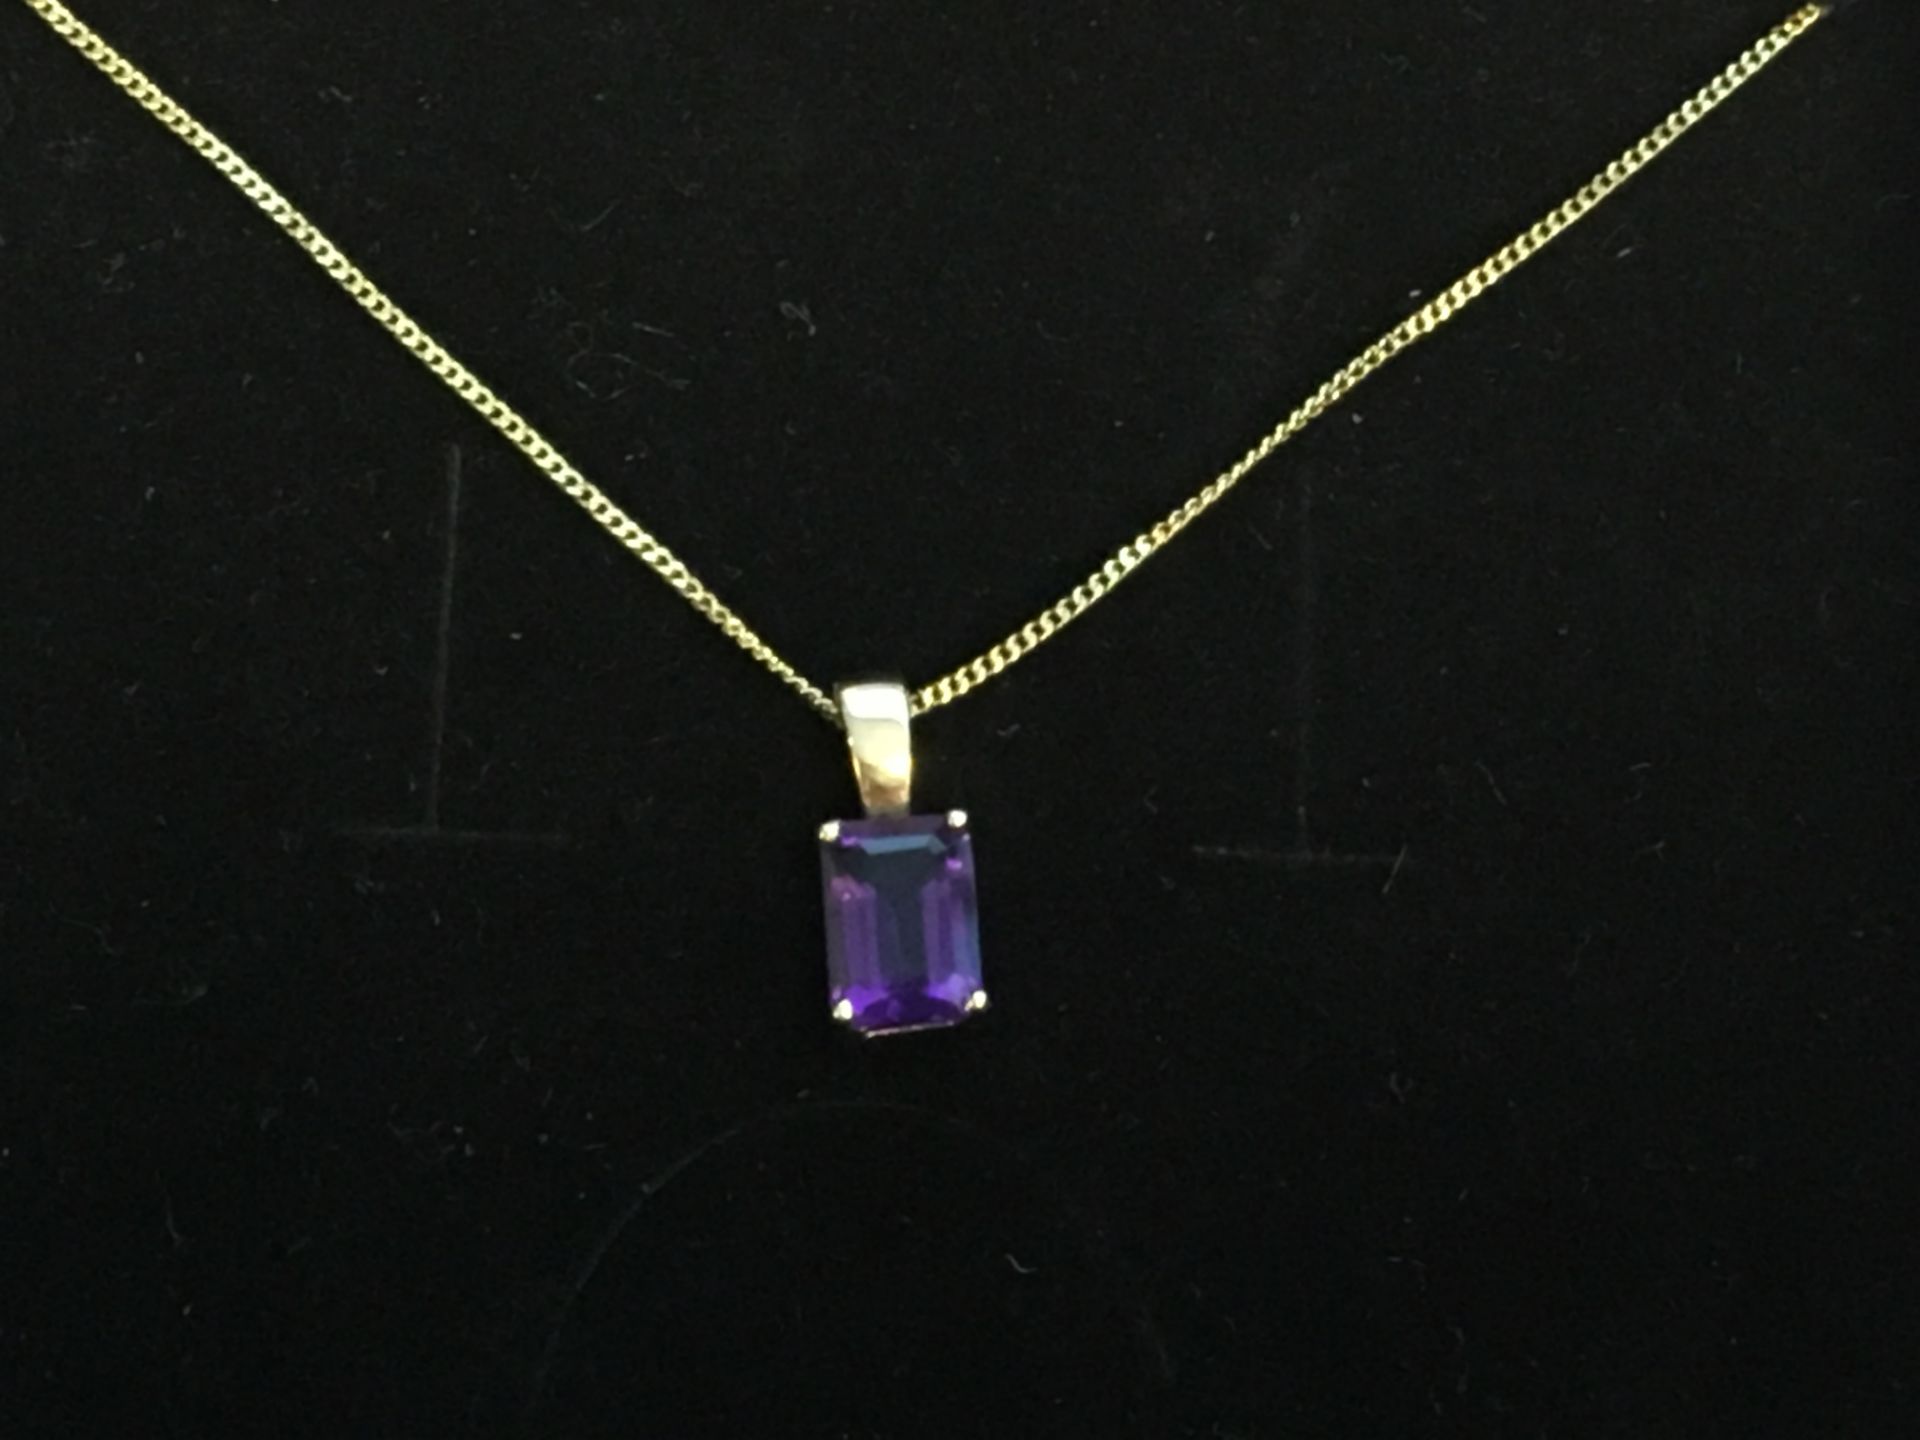 9k Yellow Gold Necklace with Amethyst Pendant